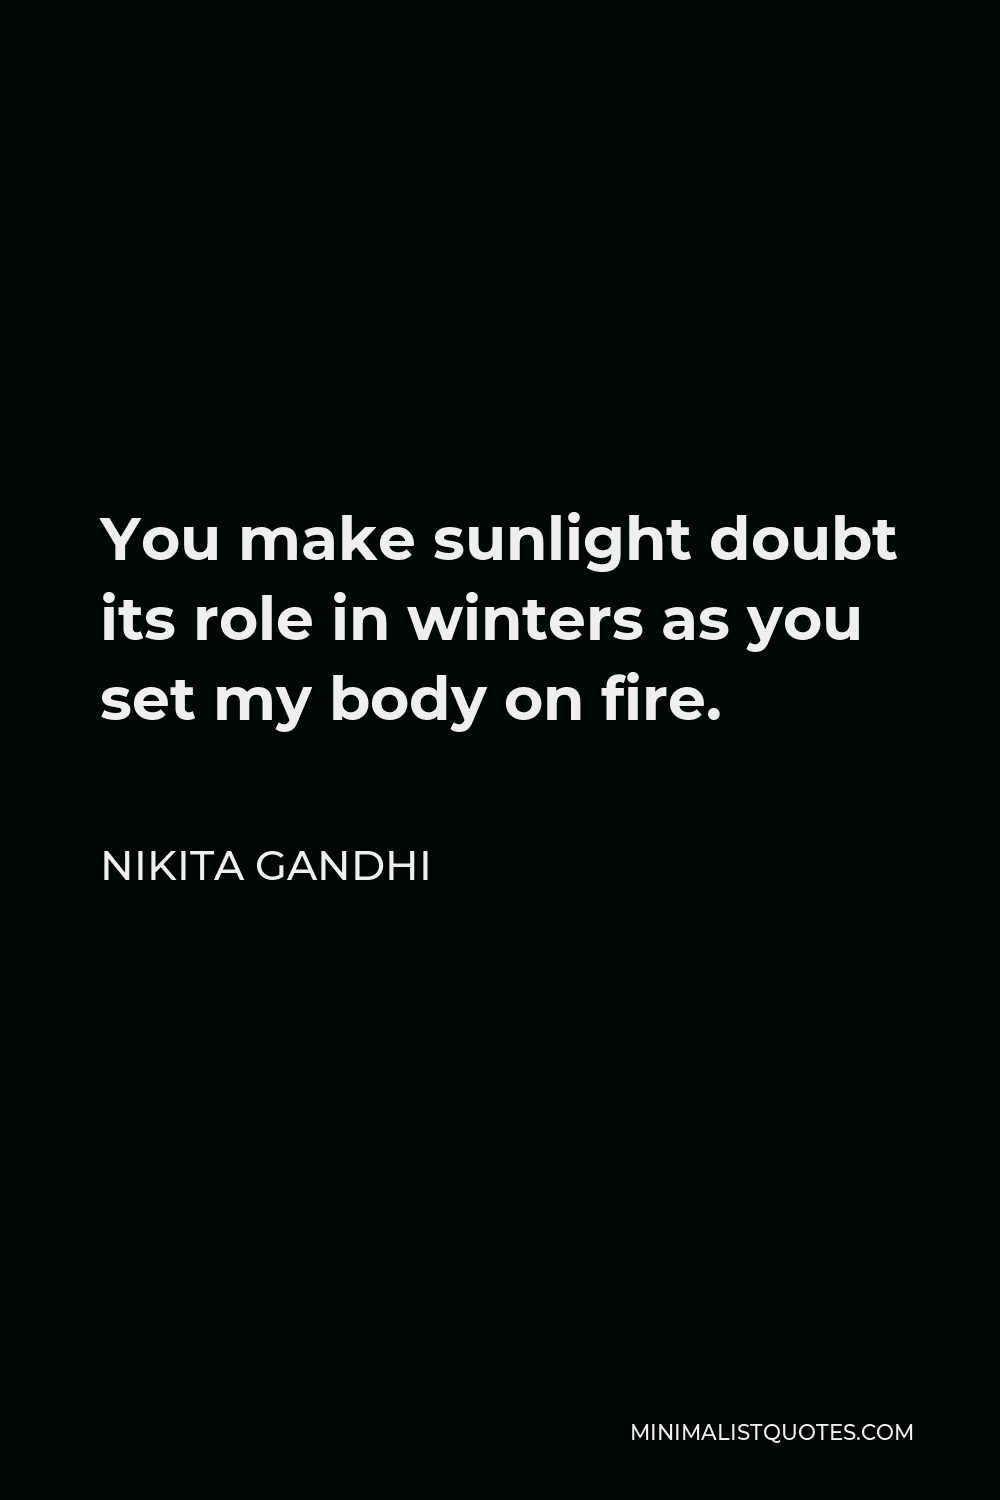 Nikita Gandhi Quote - You make sunlight doubt its role in winters as you set my body on fire.